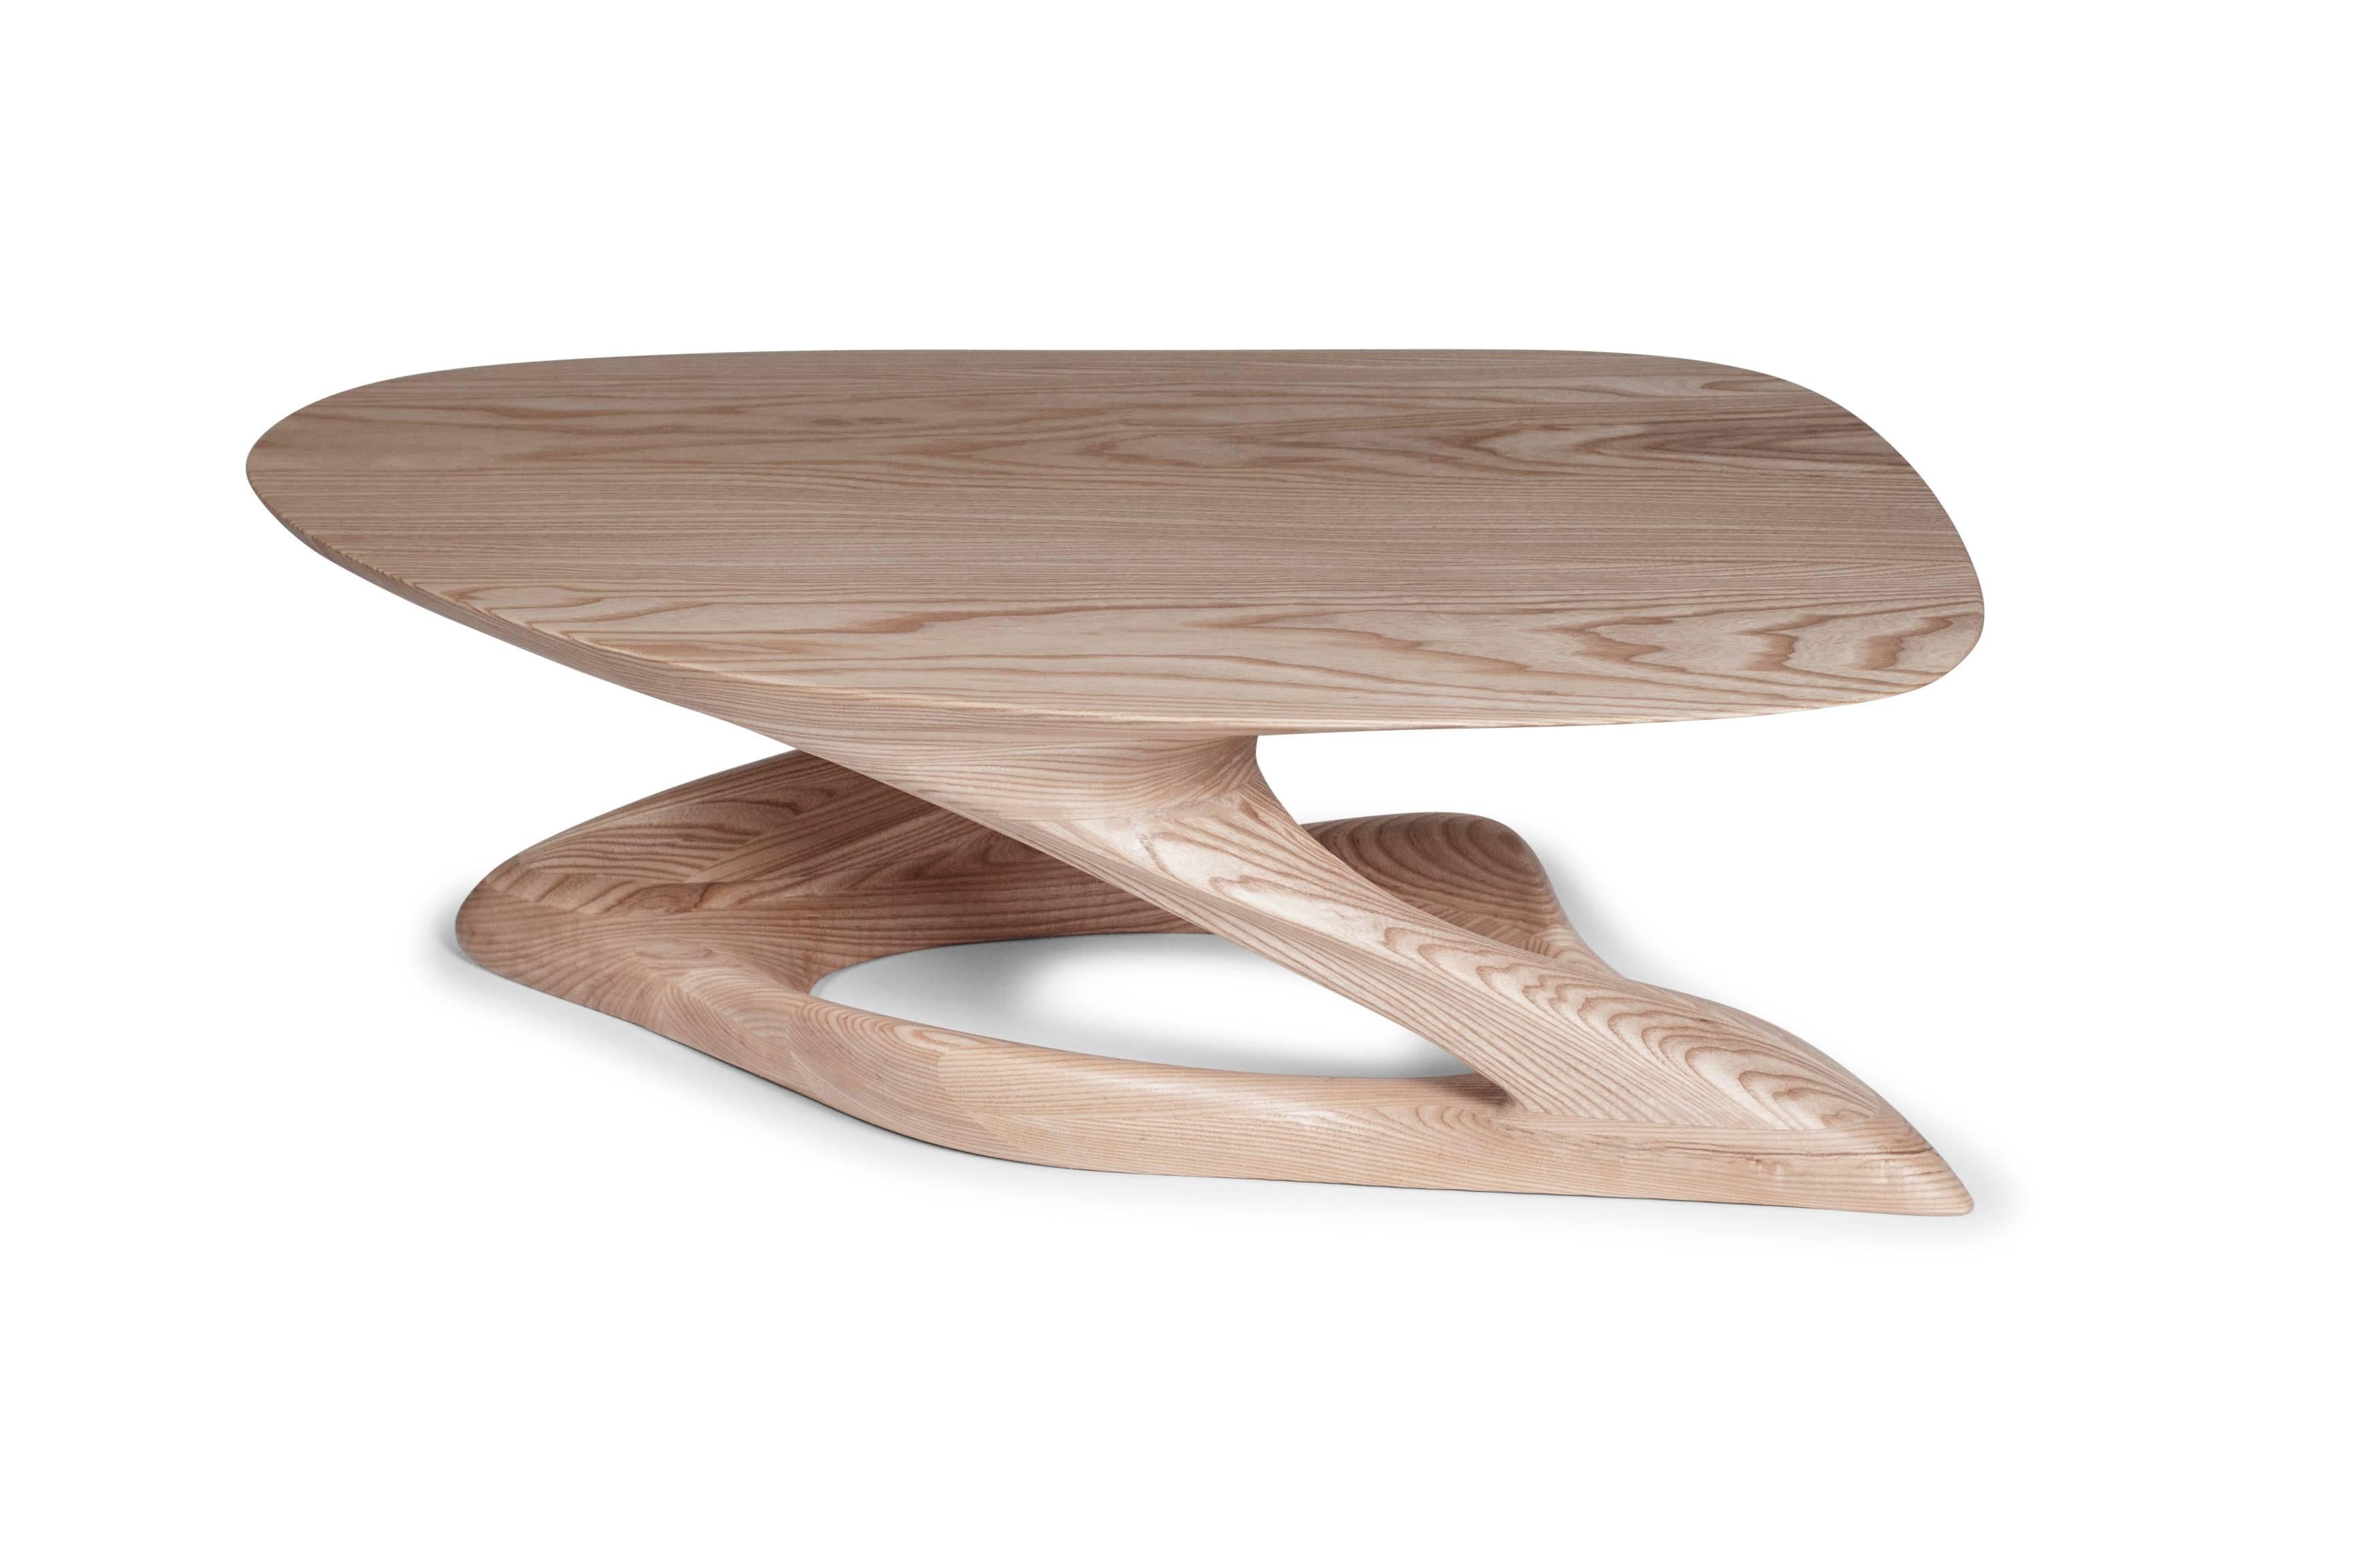 Amorph Plie modern coffee table in Honey stain in Ash wood In New Condition For Sale In Los Angeles, CA